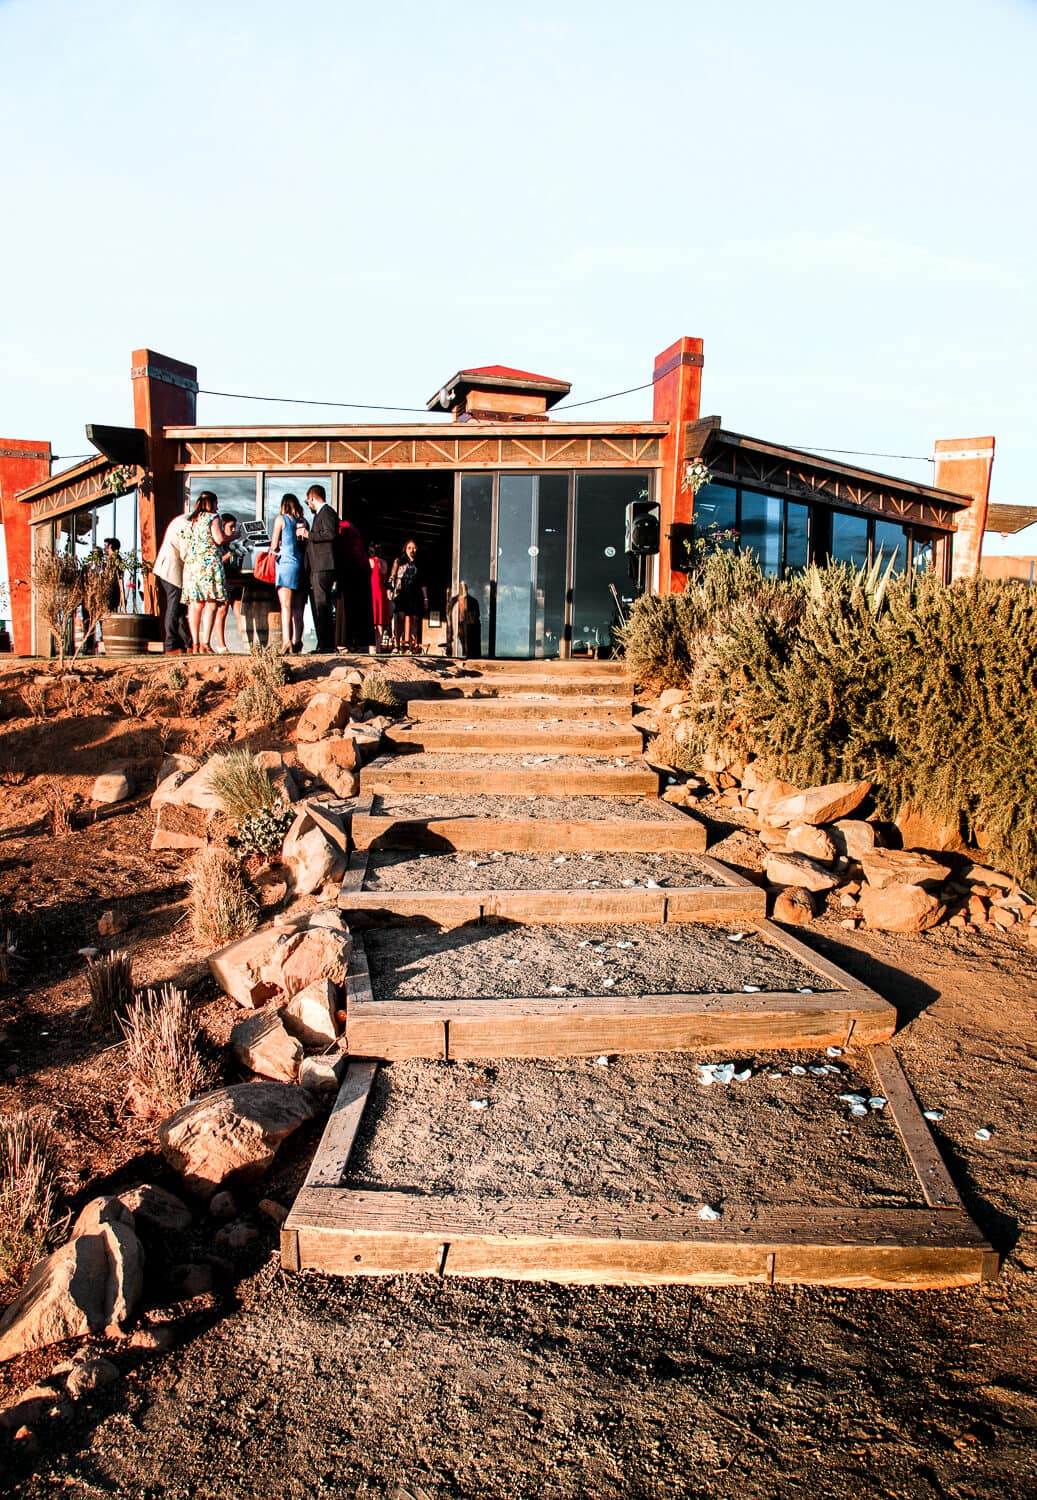 Xecue Winery | Valle de Guadalupe